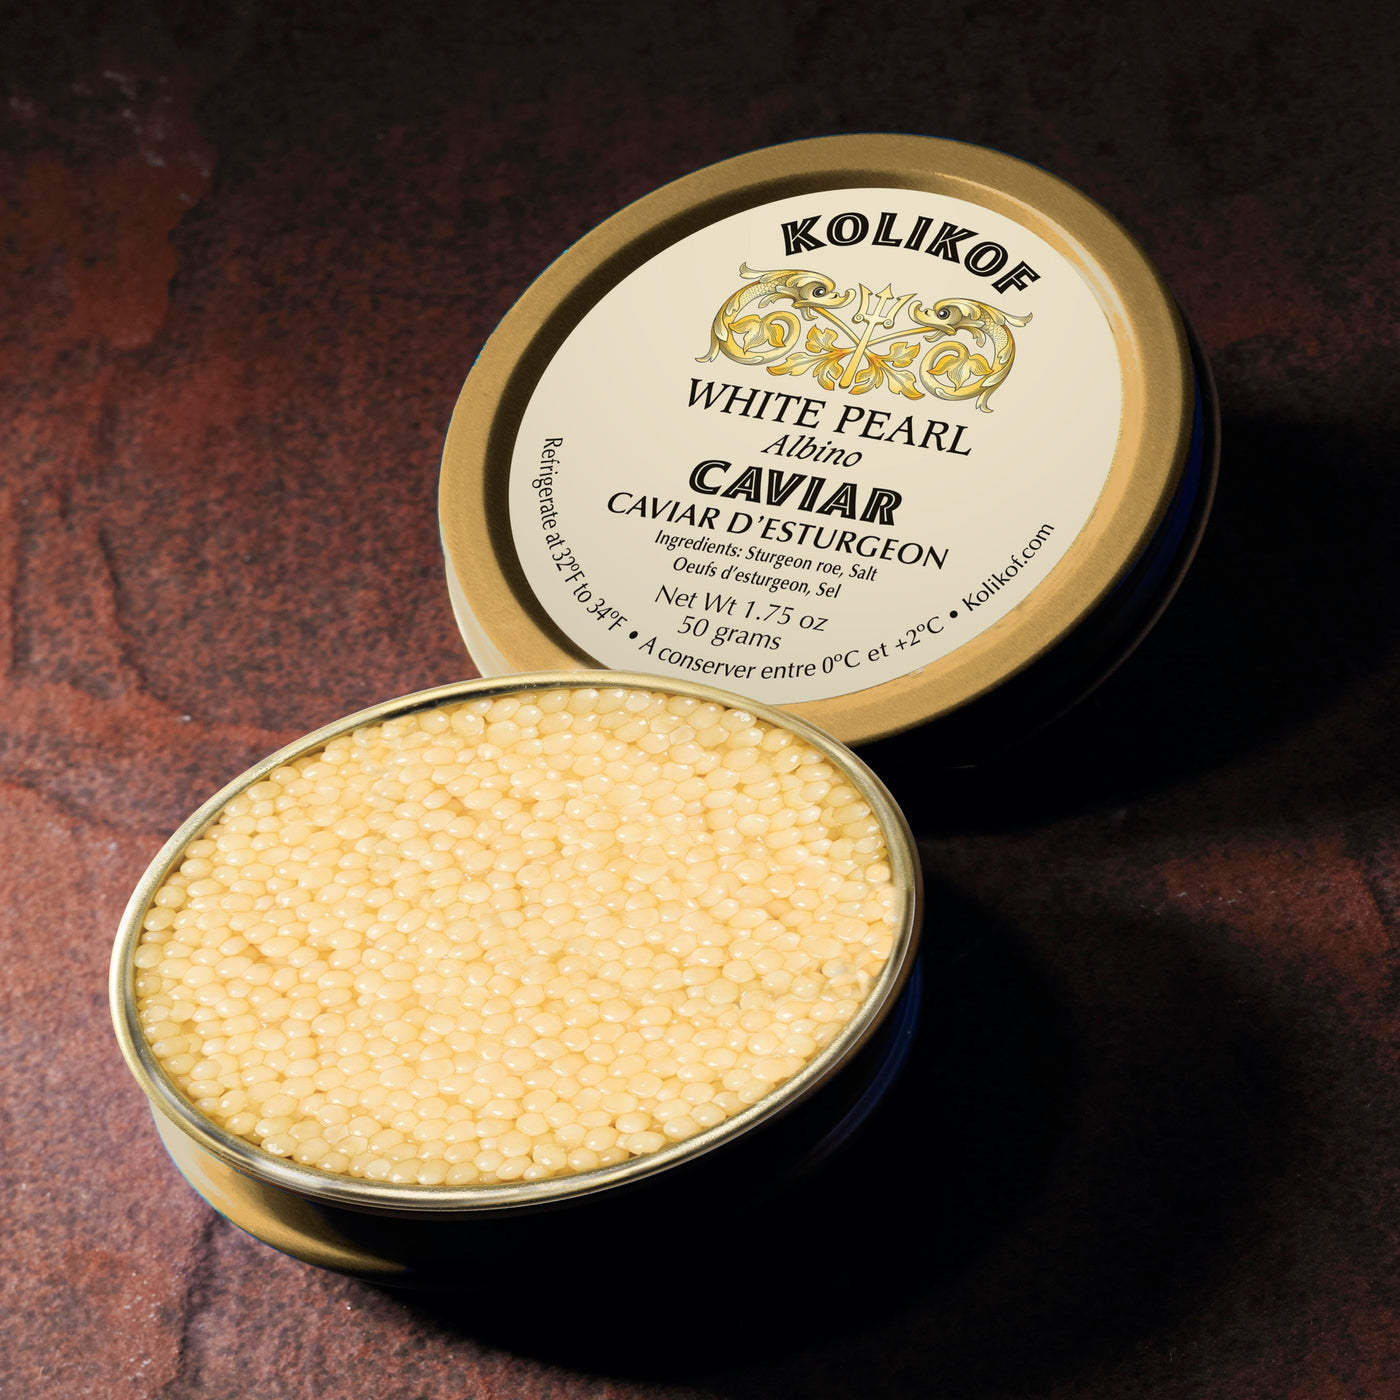 White Albino Caviar is the most expensive rare food. Buy online at Kolikof.com.